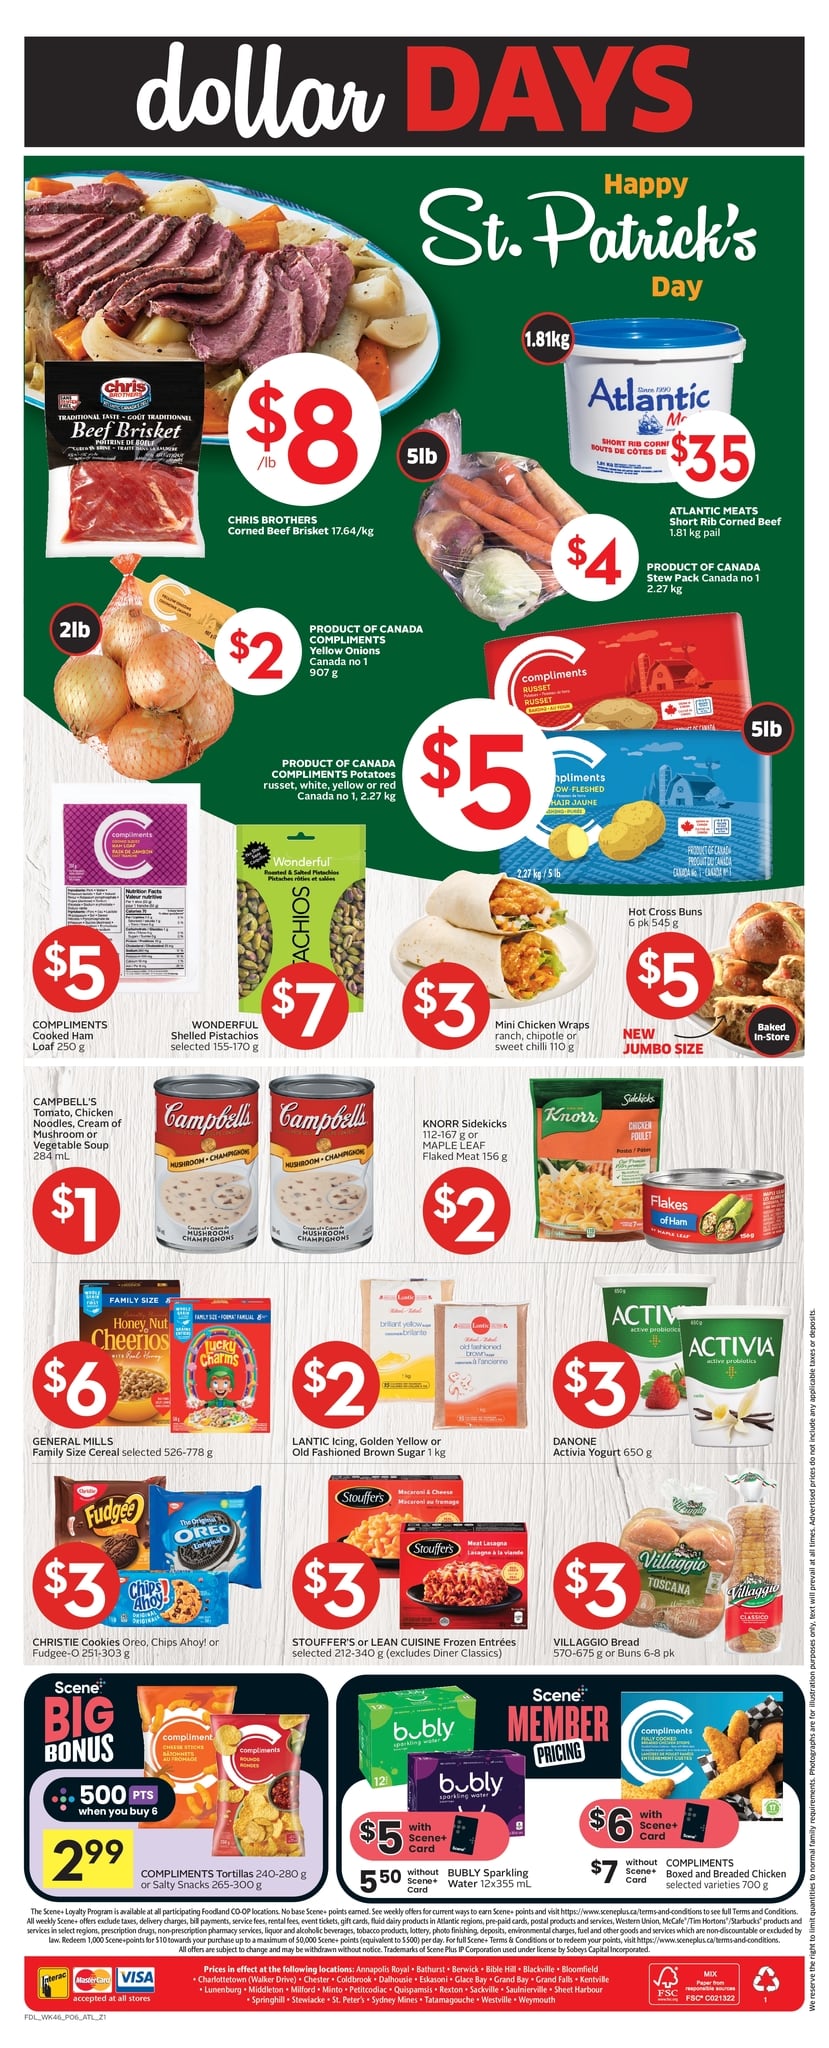 Foodland - New Brunswick - Weekly Flyer Specials - Page 6